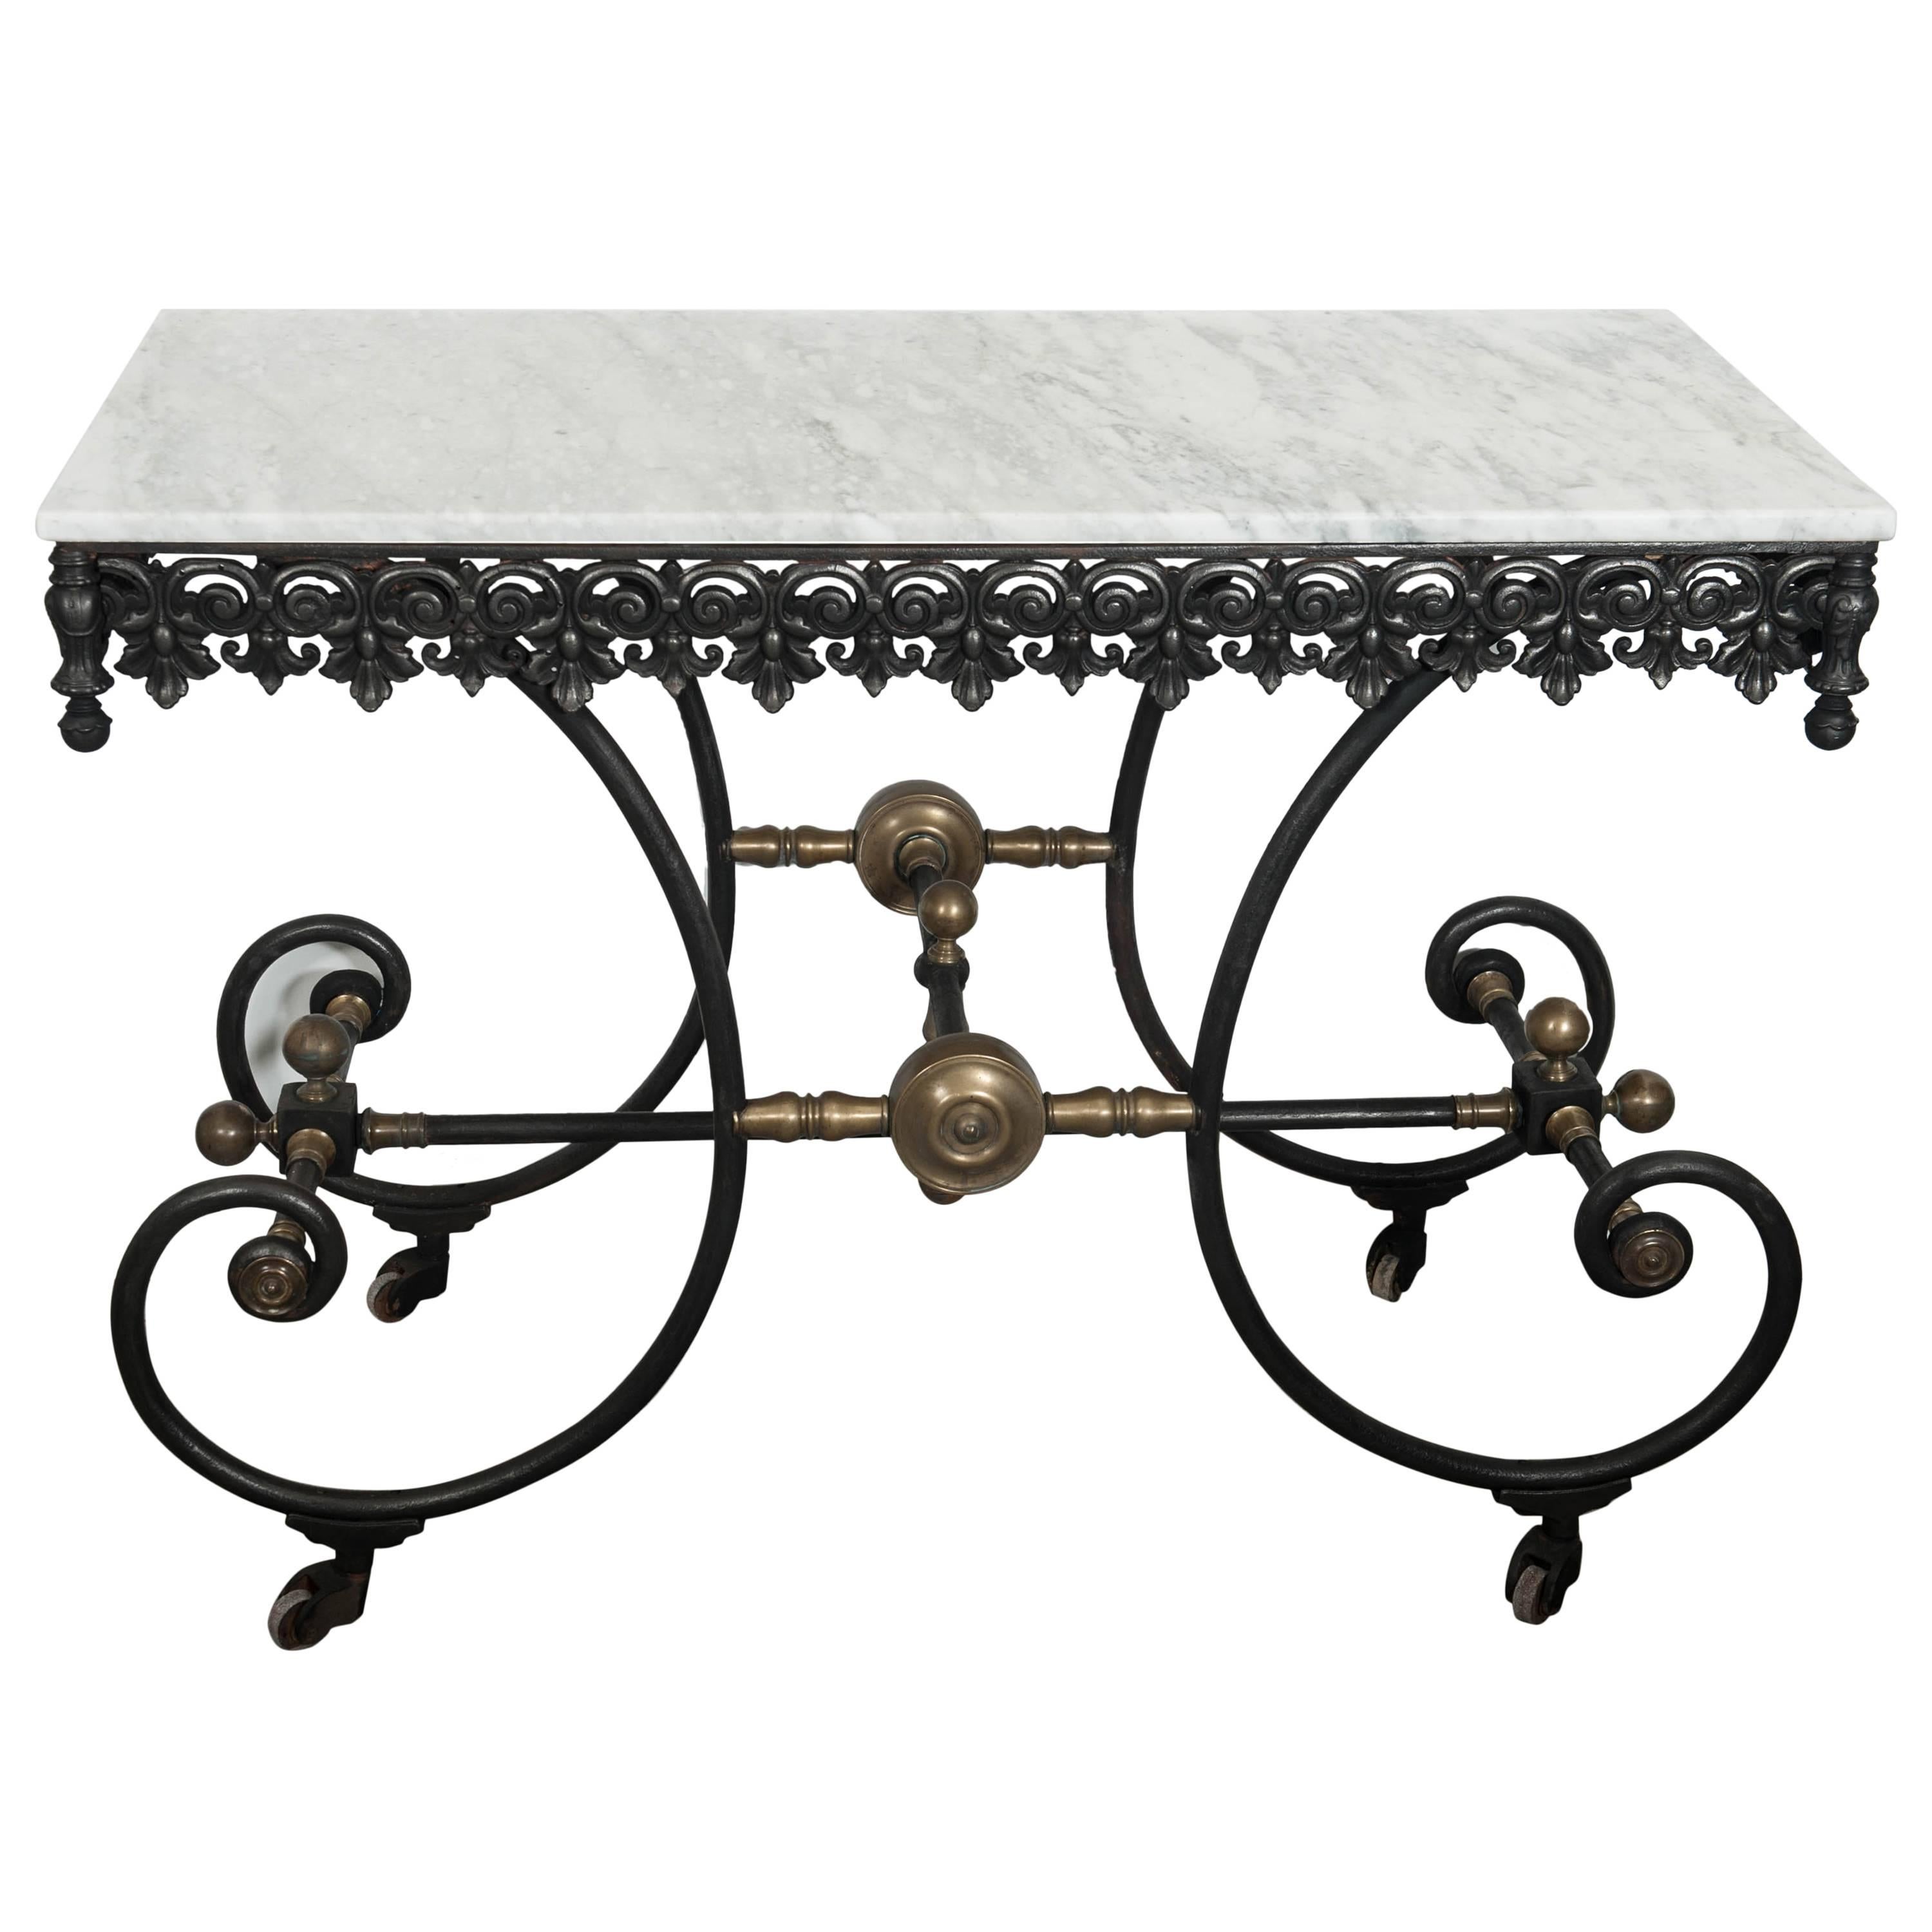 Antique French Cast Iron, Wrought Iron and Brass Butcher Table, circa 1900